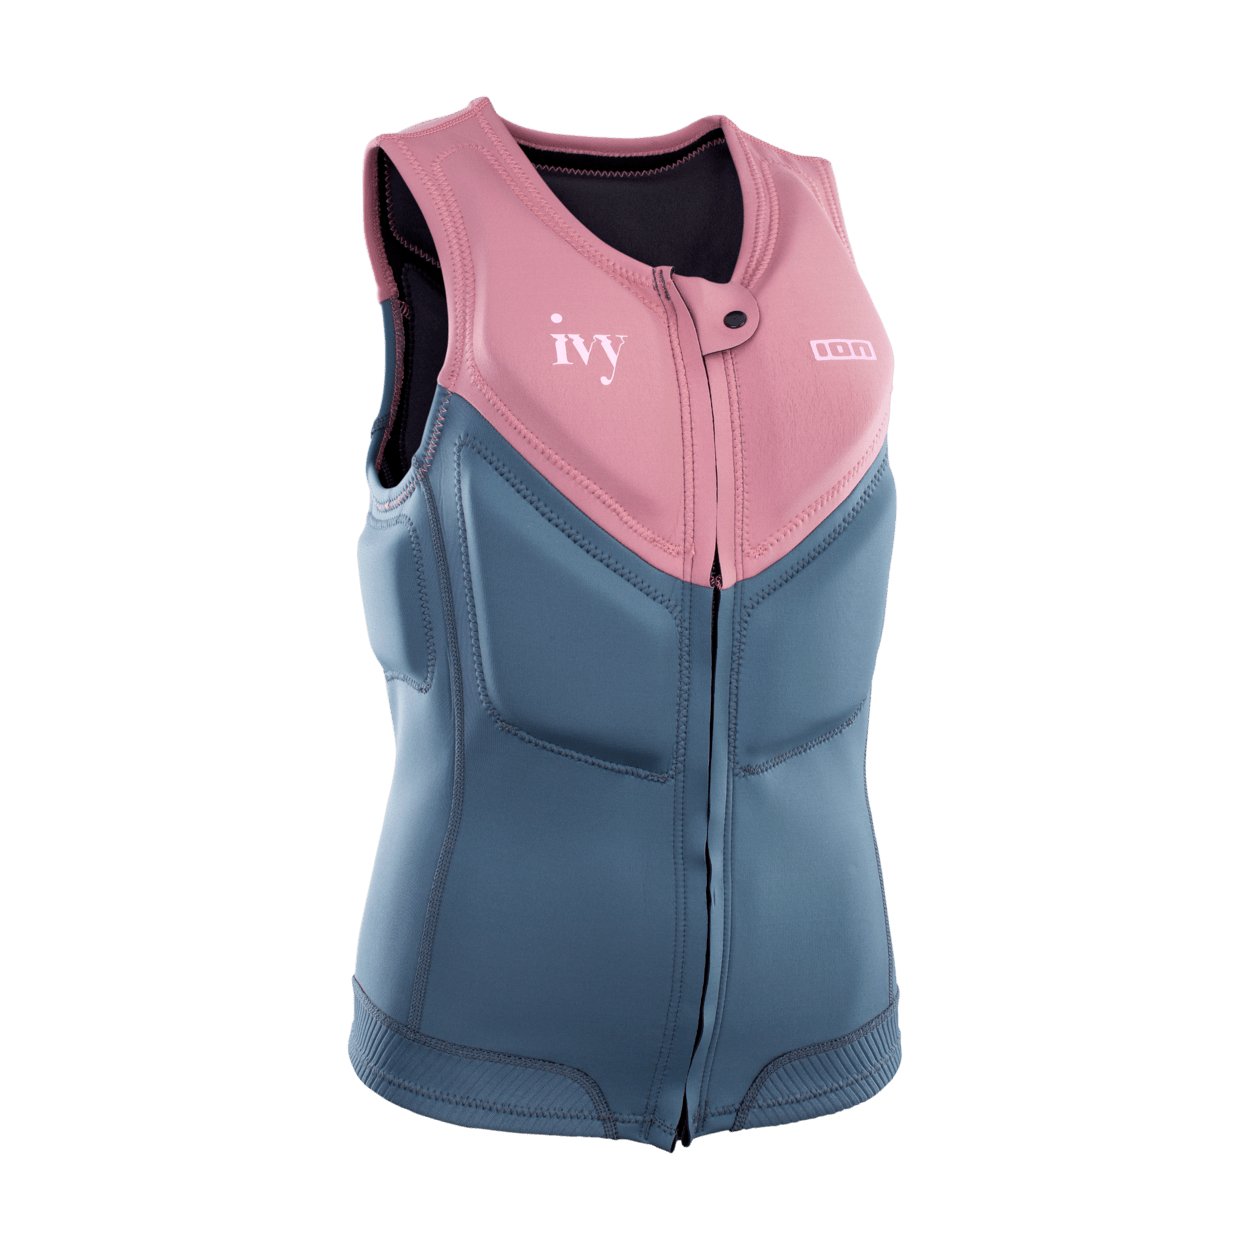 ION Ivy Vest Front Zip 2022 - Worthing Watersports - 9010583051949 - Protection - ION Water